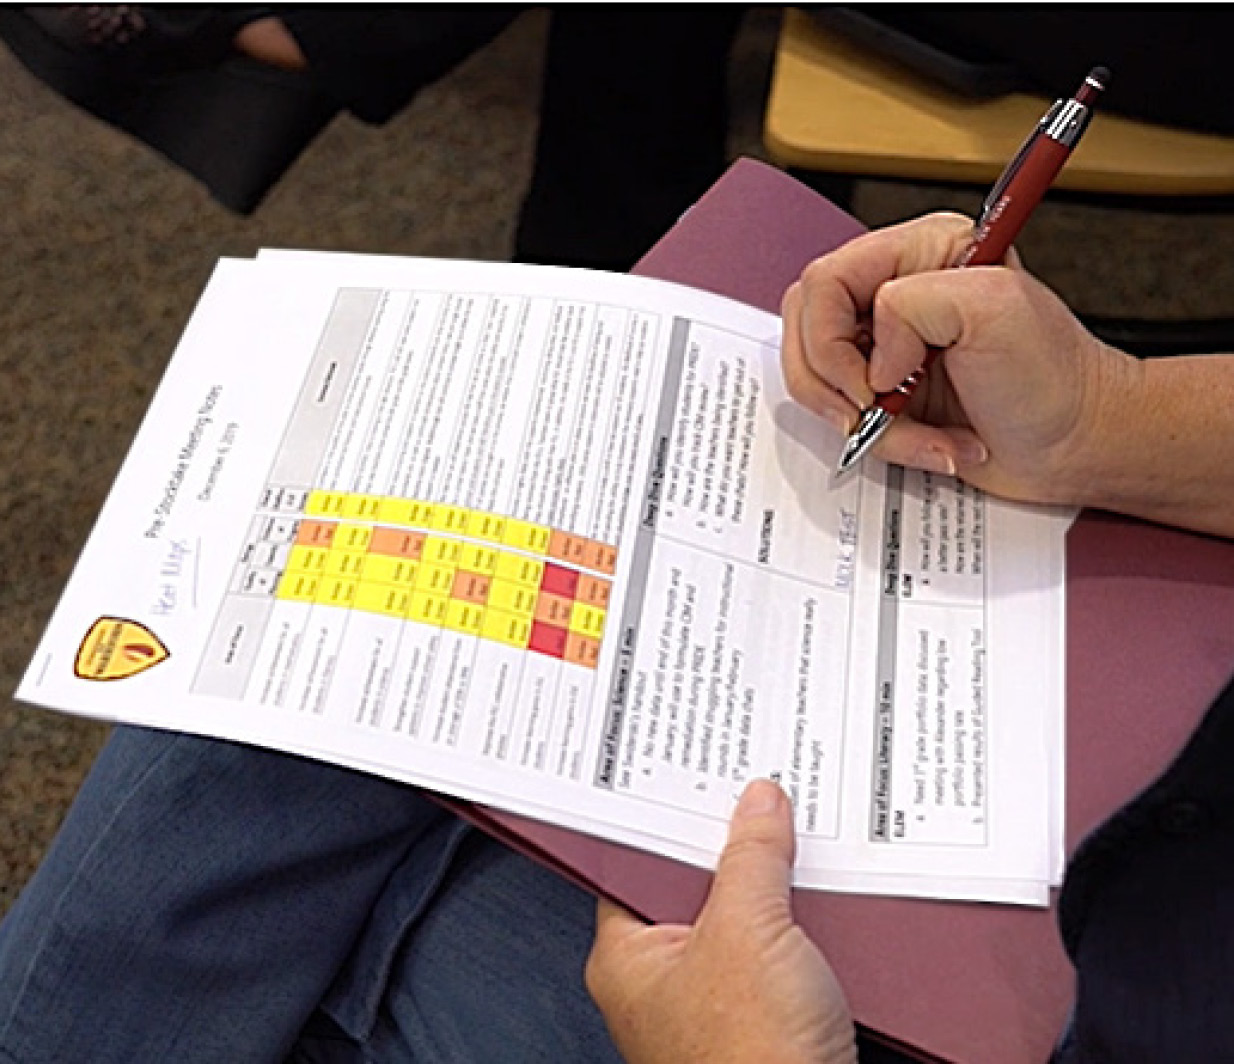 A Stocktake participant takes notes while reviewing the rating sheet, also referred to as a heat map.